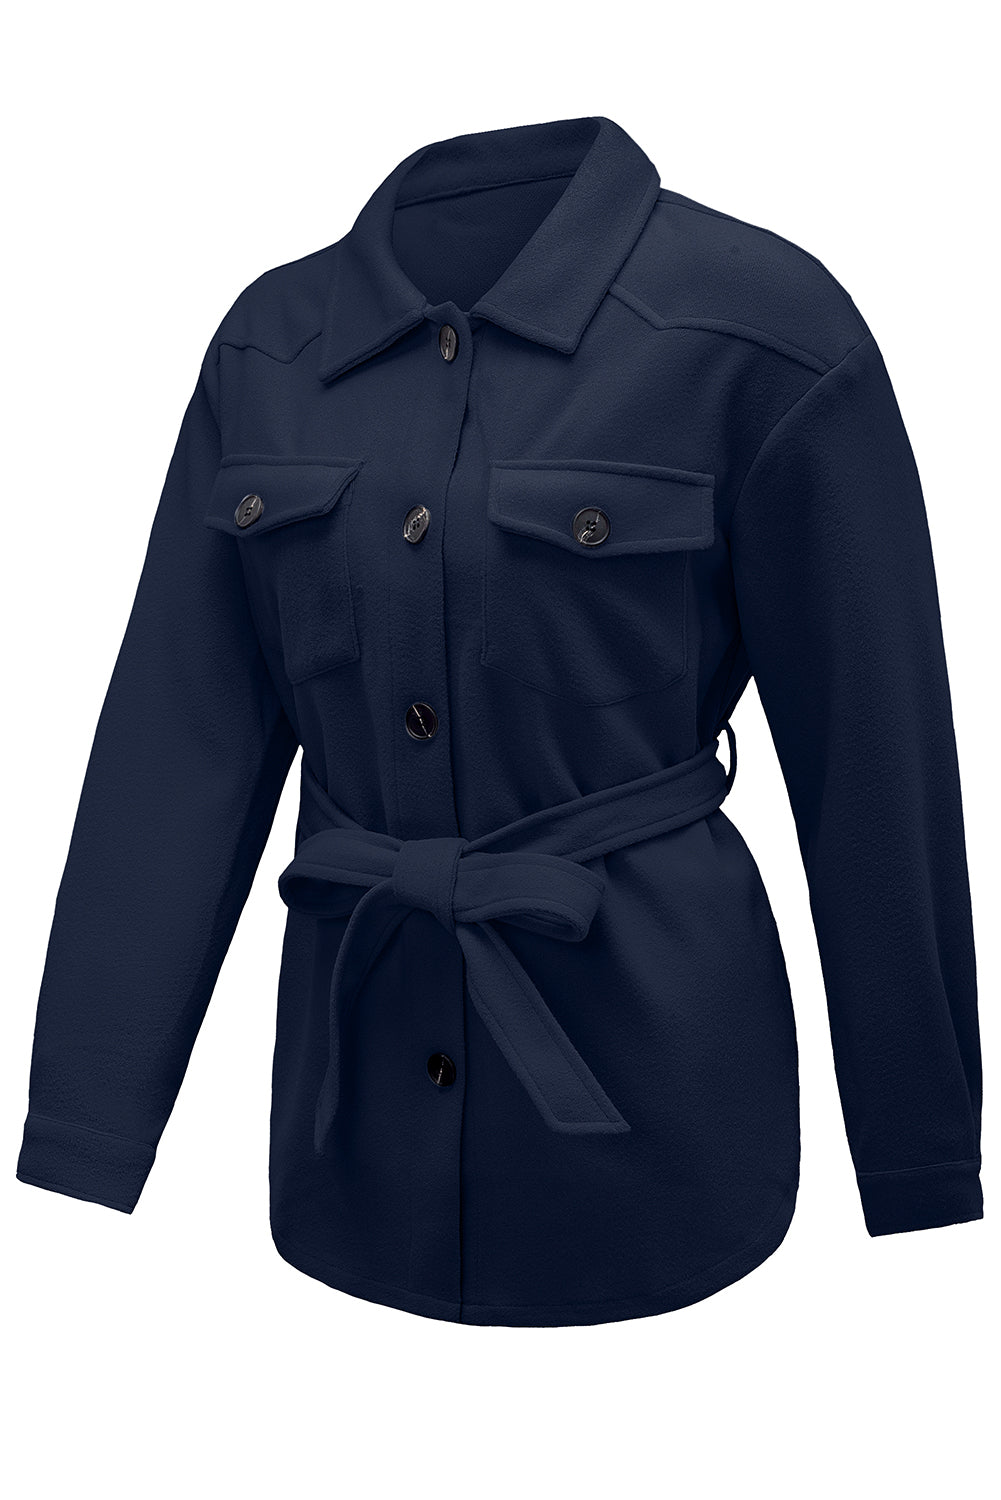 Blue Women's Lapel Button Down Coat Winter Belted Coat with Pockets LC8511359-5